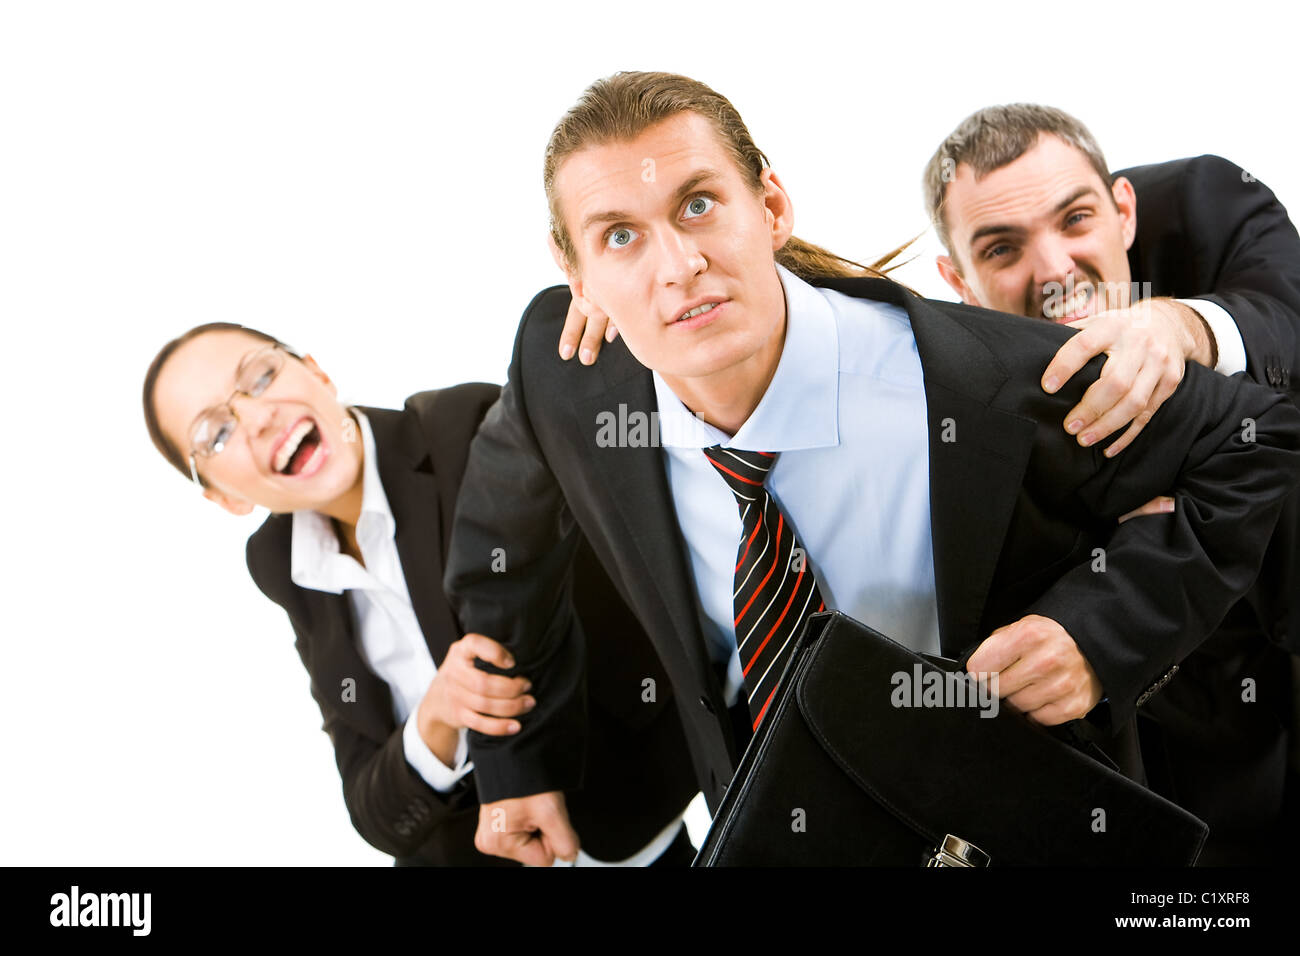 Image of businessman trying to free from his co-workers’ hands Stock Photo